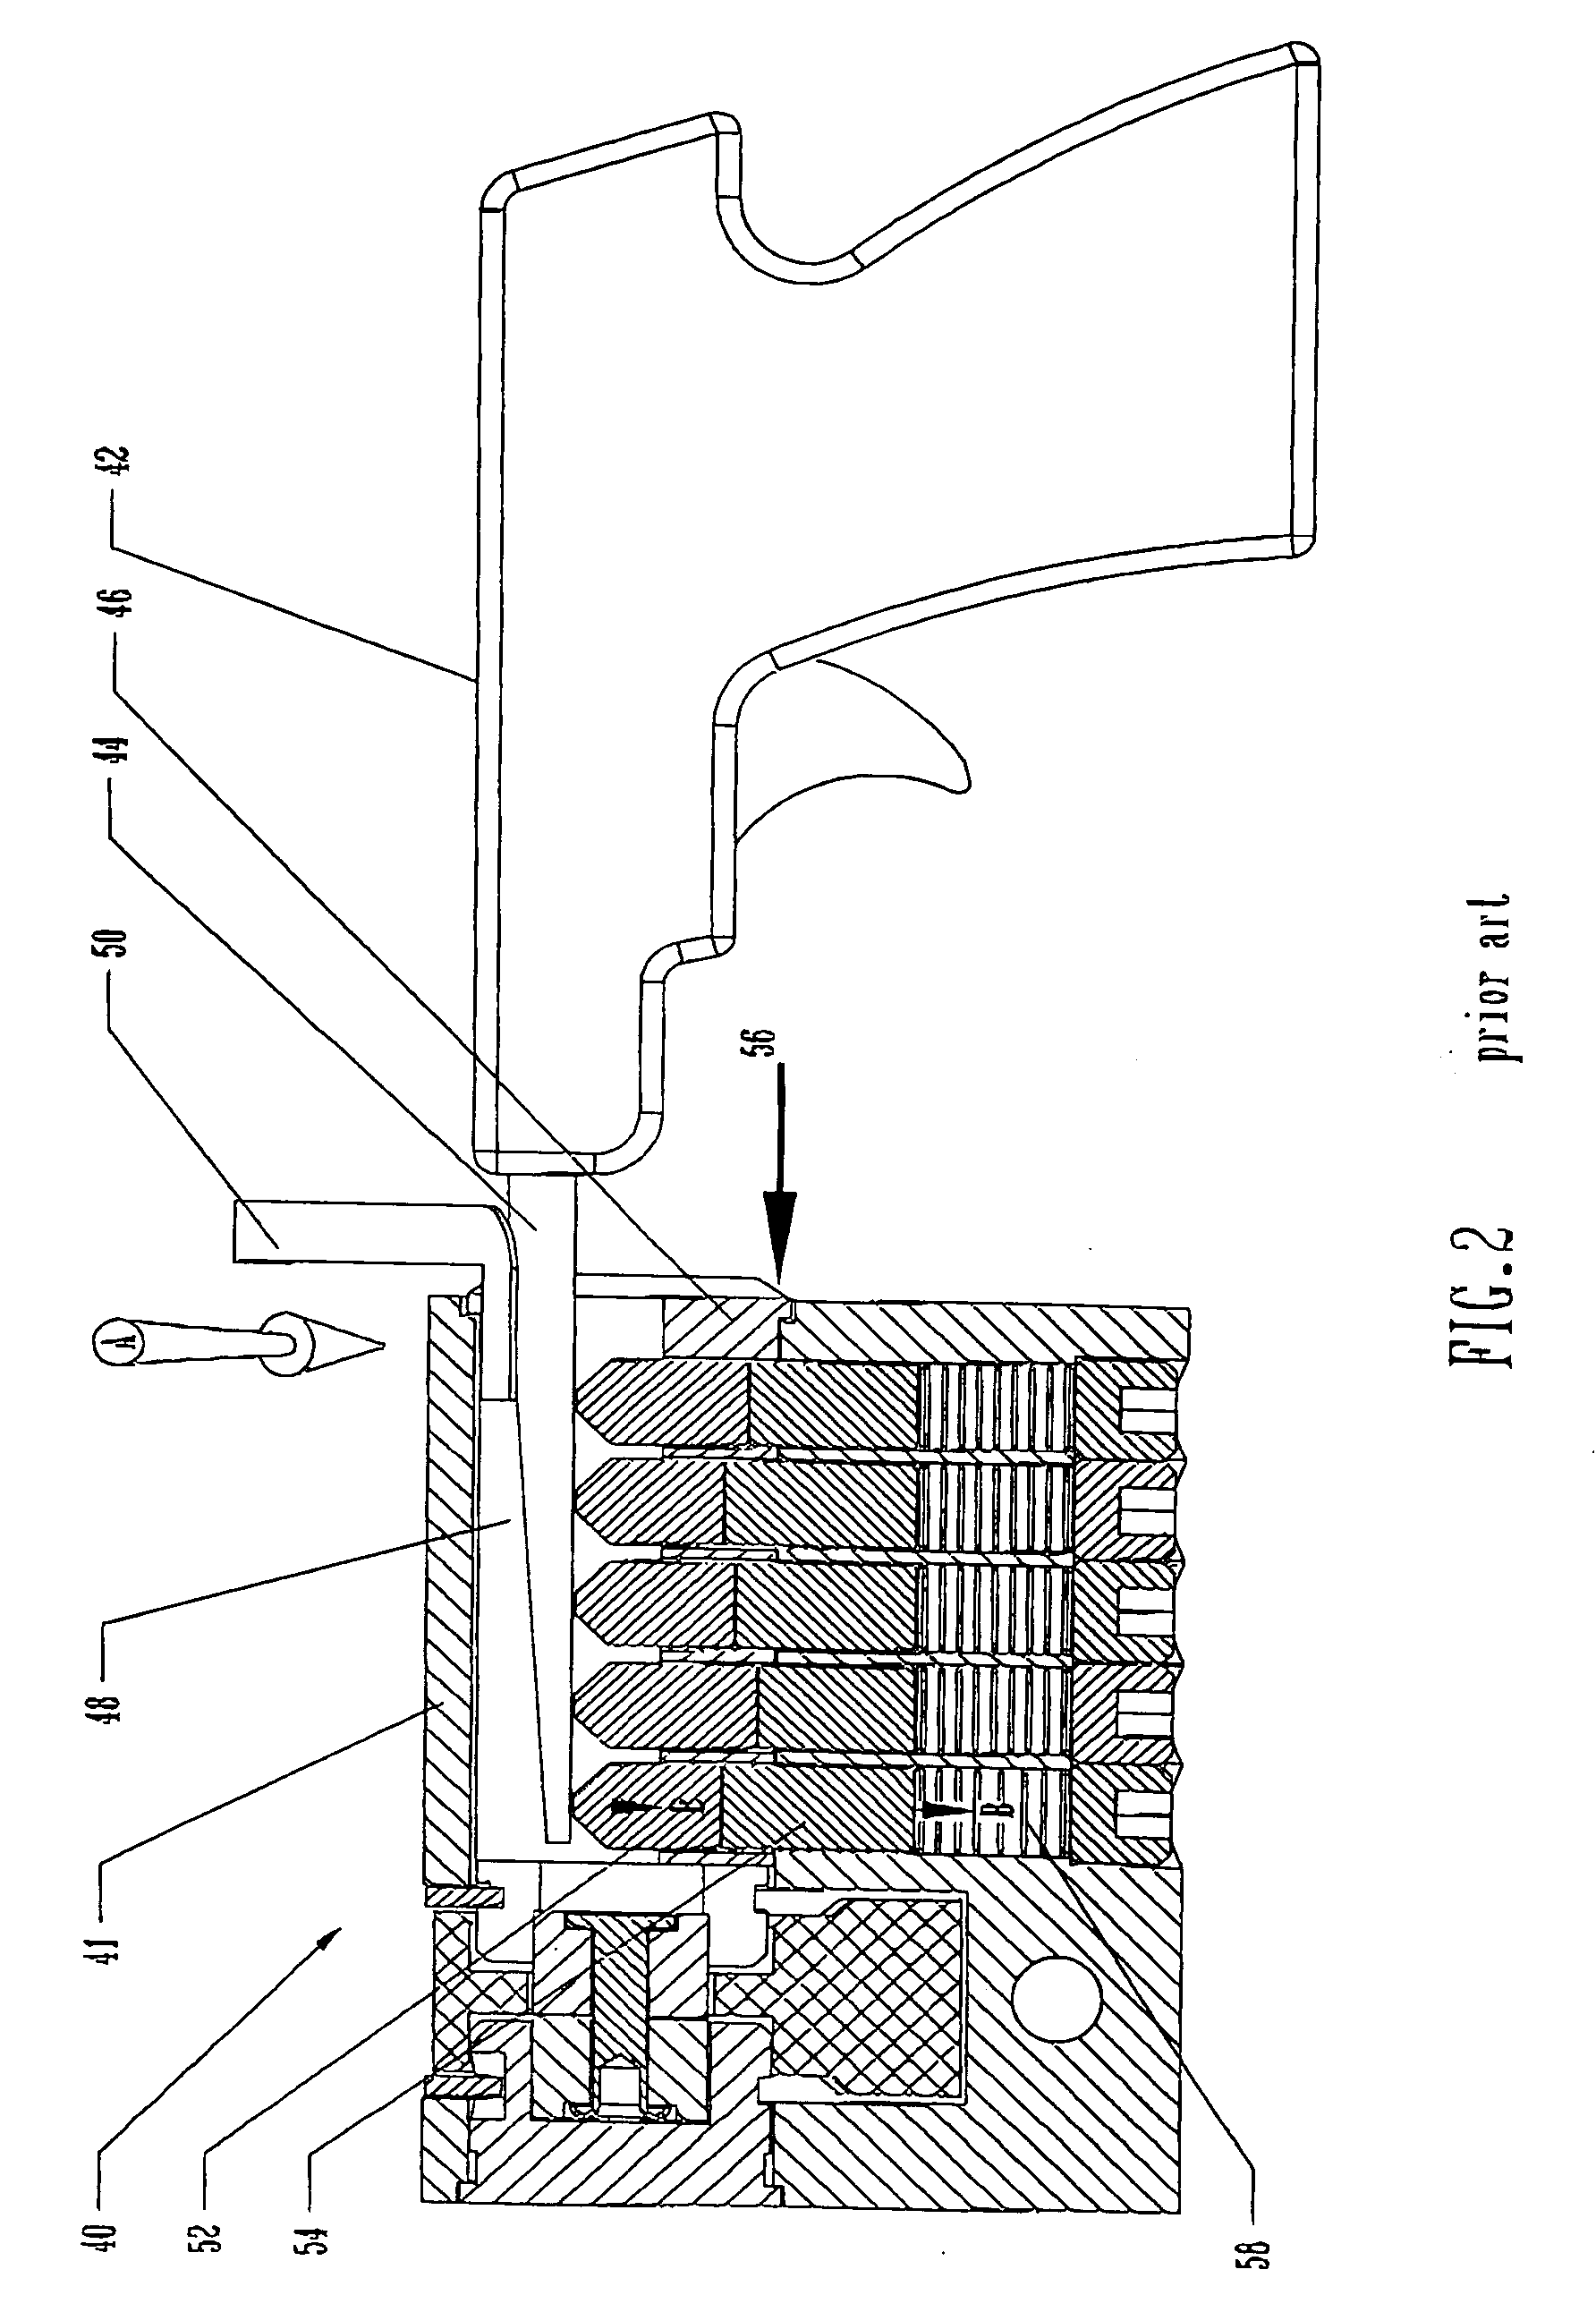 Method and assembly to prevent impact-driven manipulation of cylinder locks